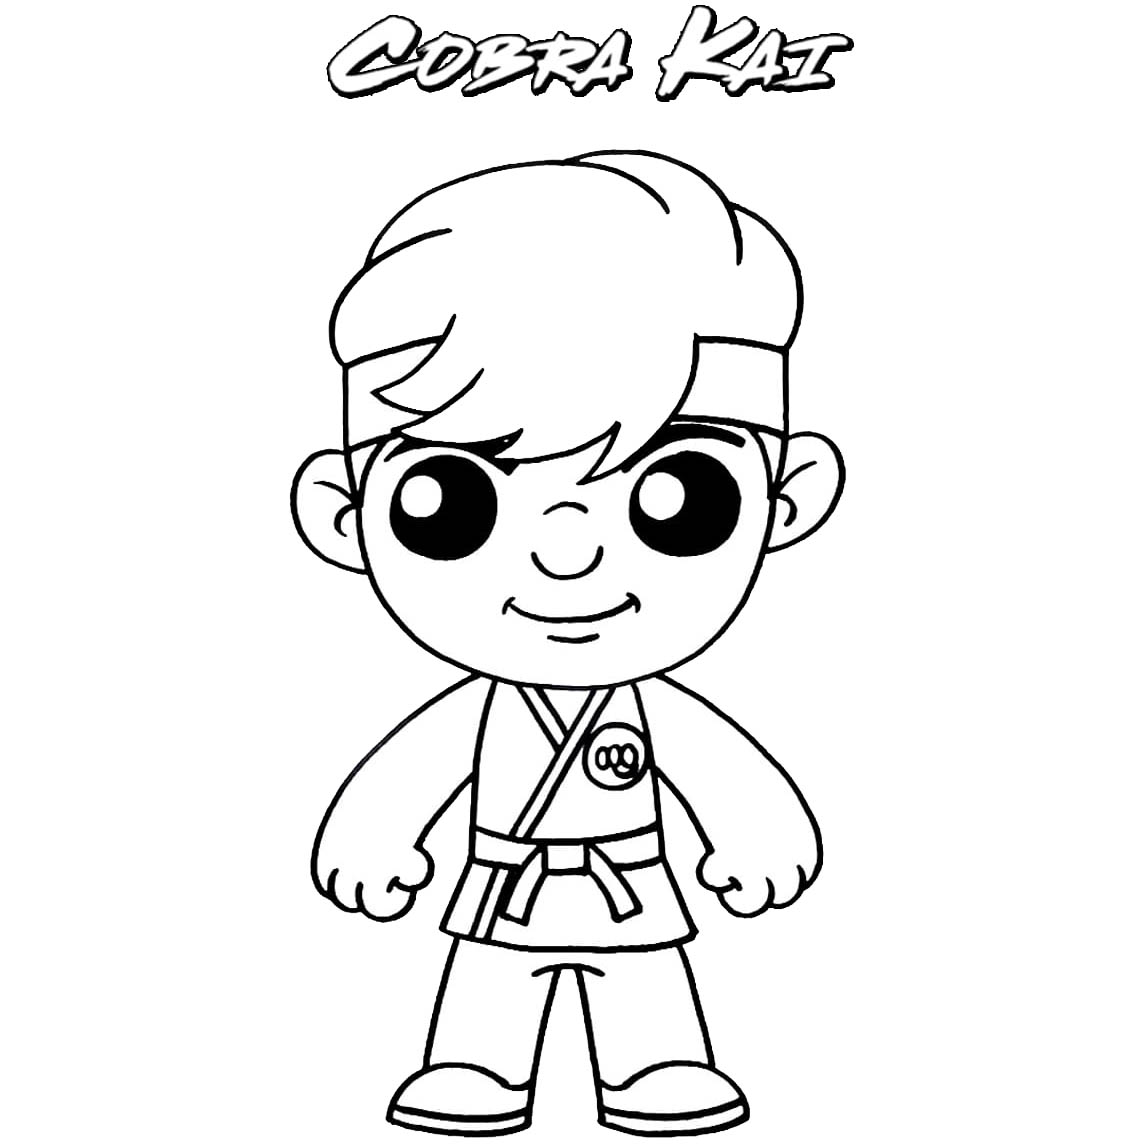 Cobra Kai Coloring Pages Johnny Lawrence - XColorings.com